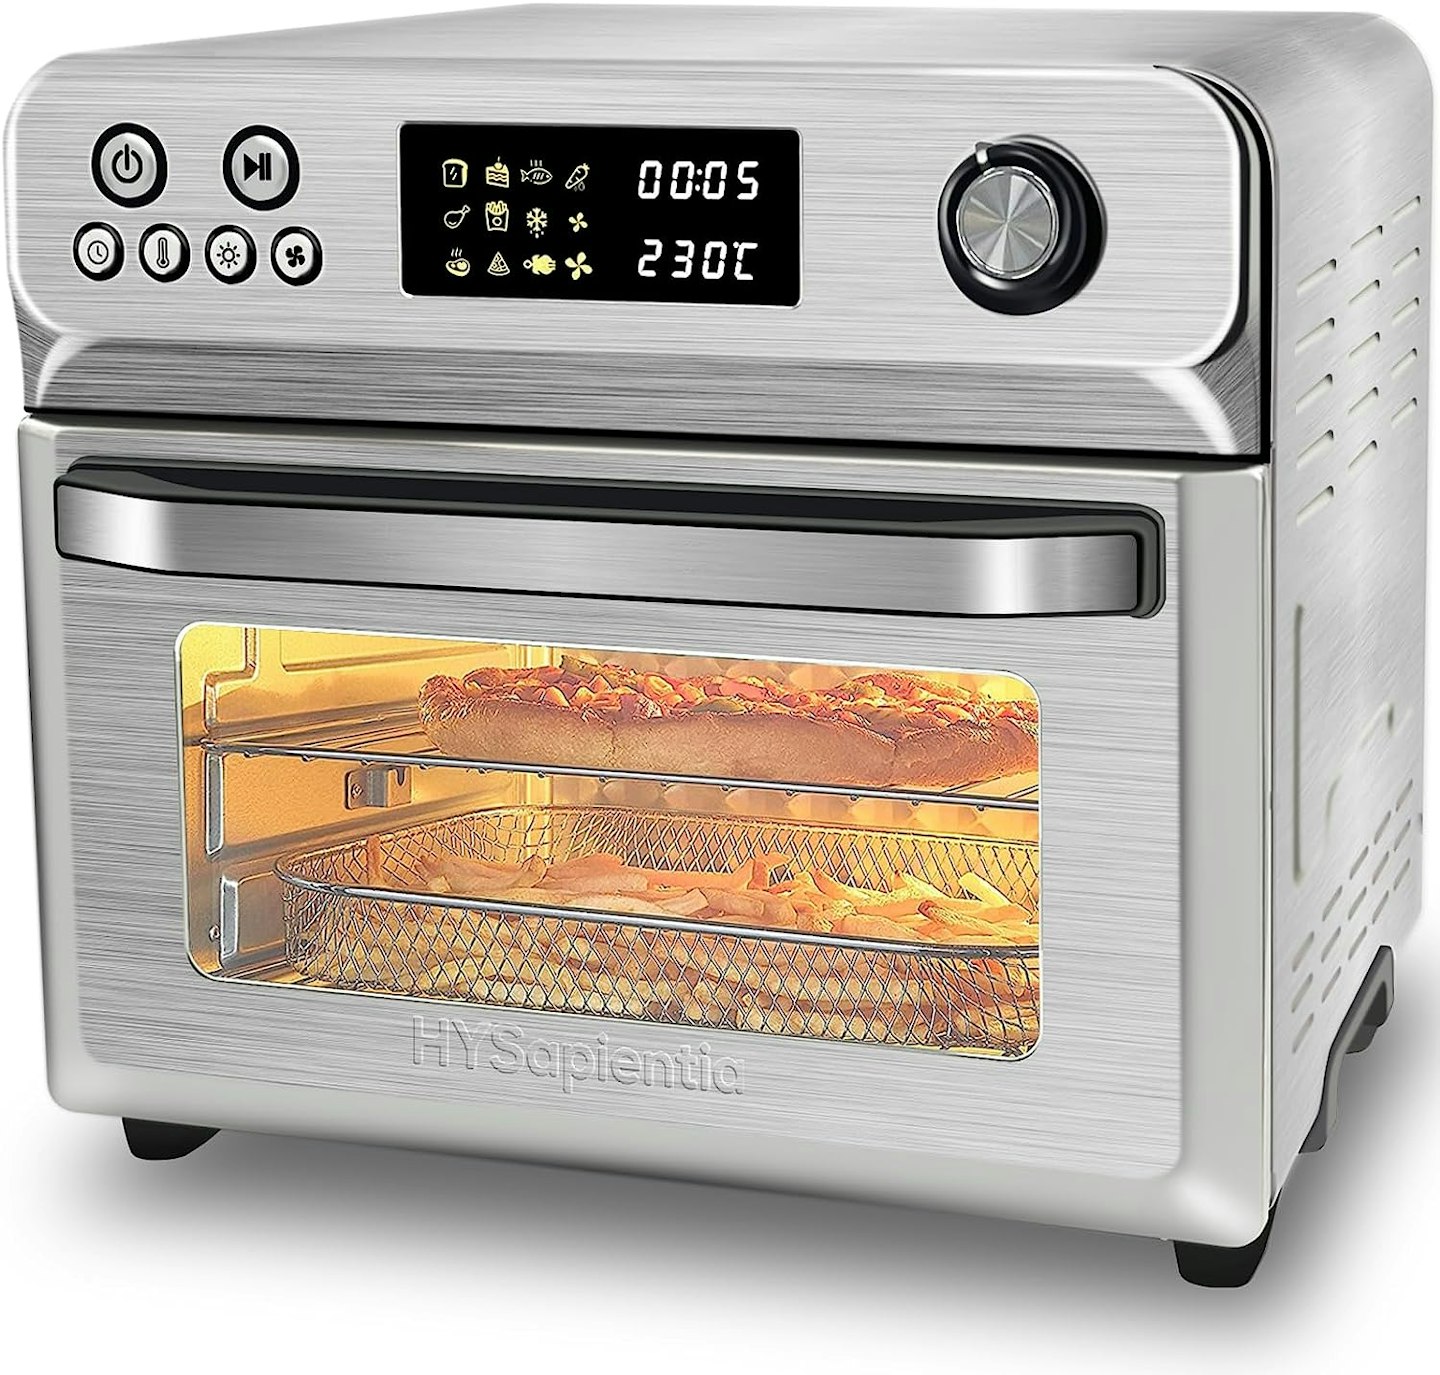 HYSapientia 24L Air Fryer Oven With Rotisserie